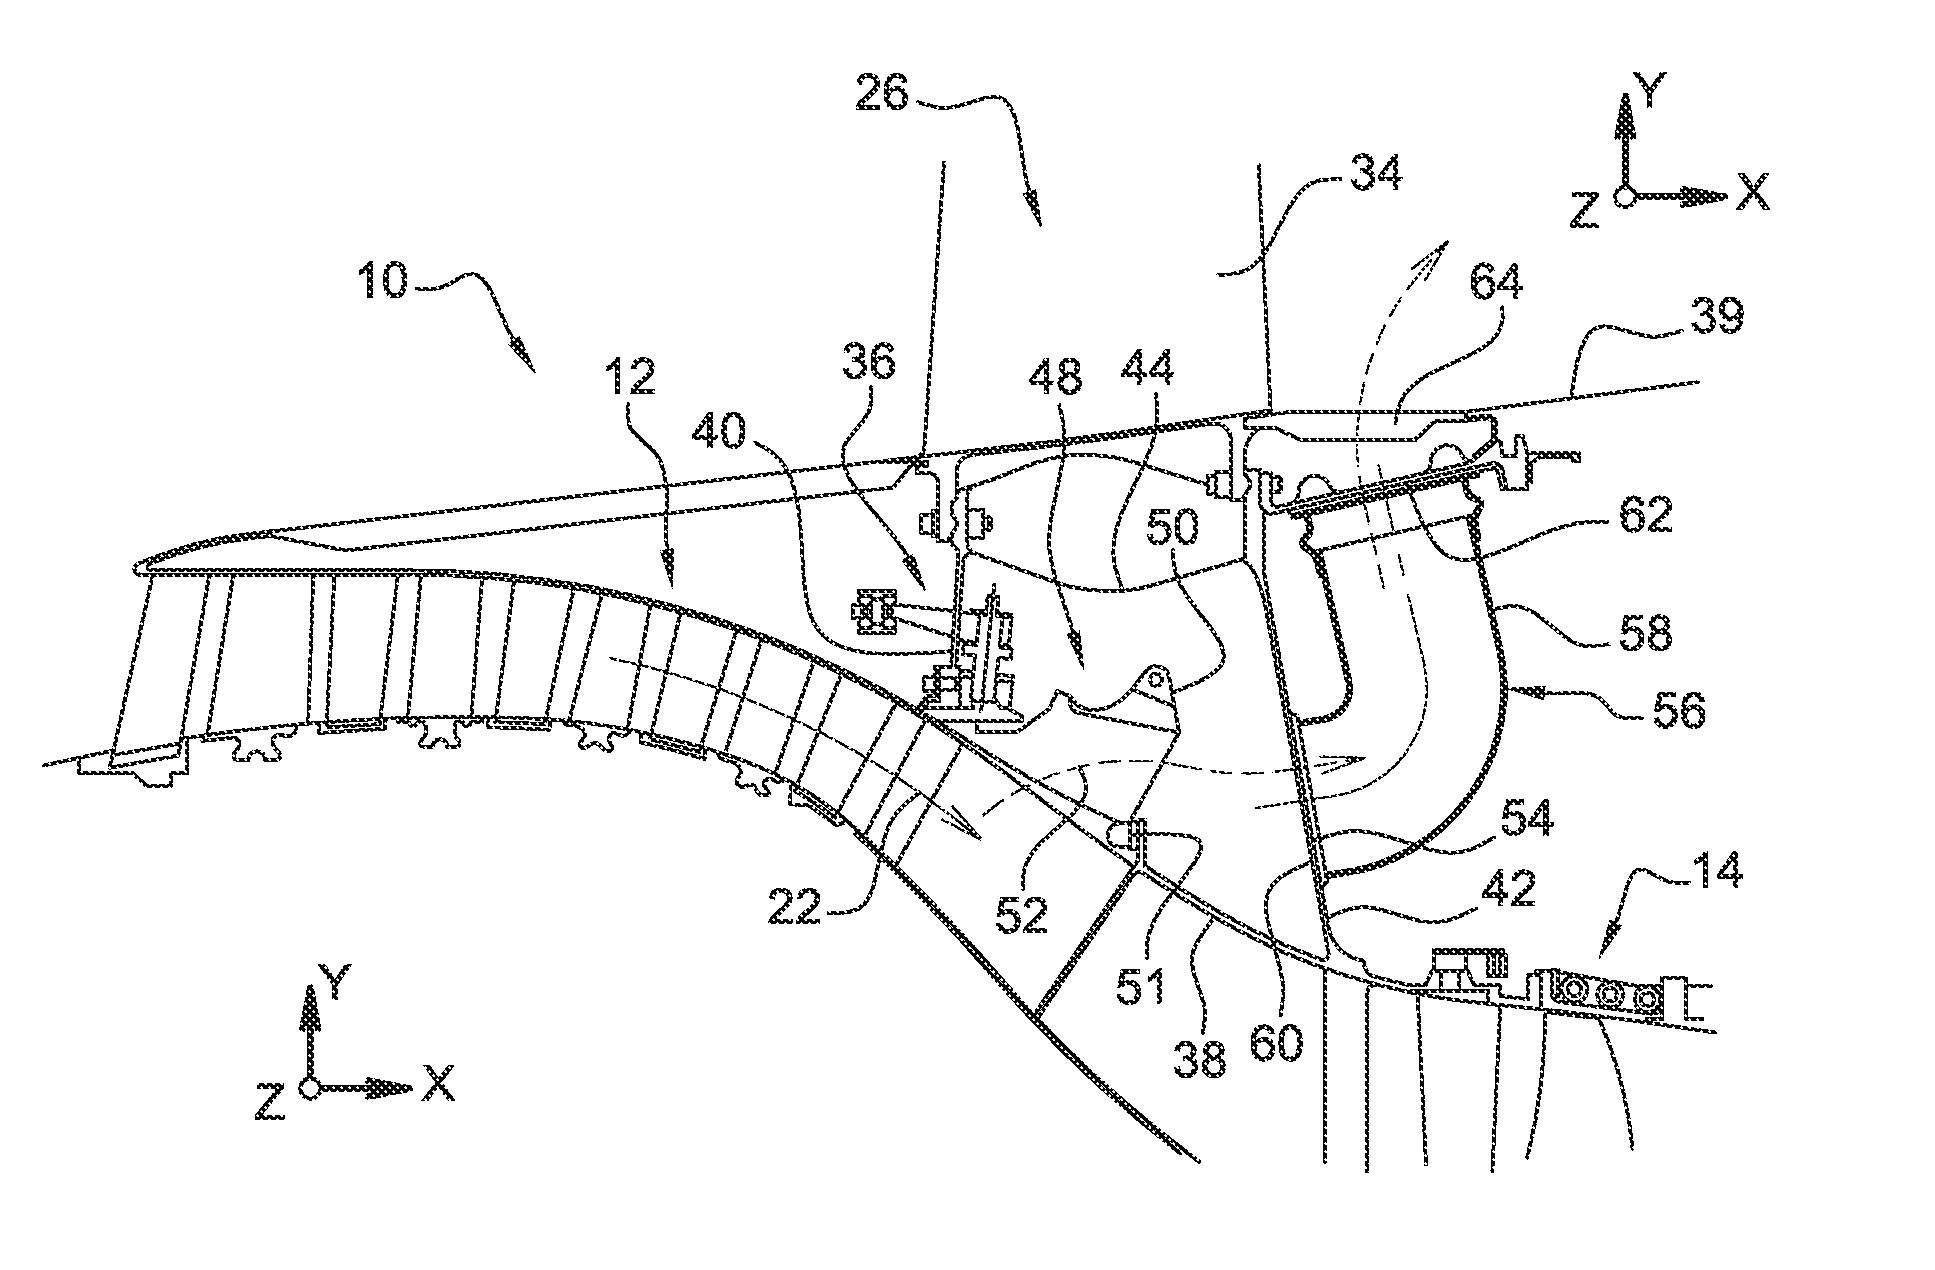 Attachment of a discharge conduit of a turbine engine